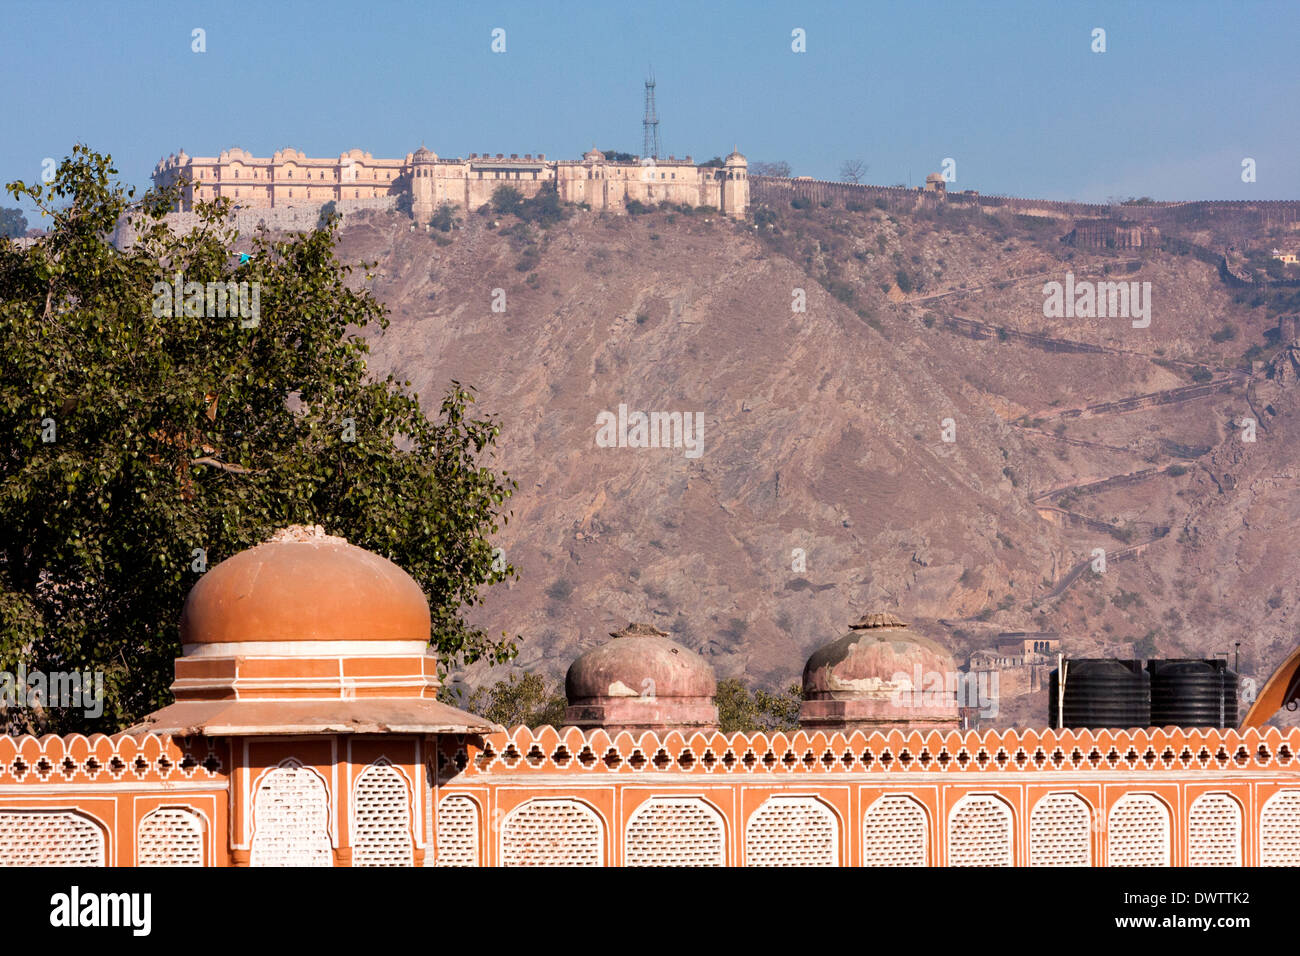 Jaipur, Rajasthan, India. Nahargarh Fort on Hilltop overlooking the Hawa Mahal in Central Jaipur. Stock Photo